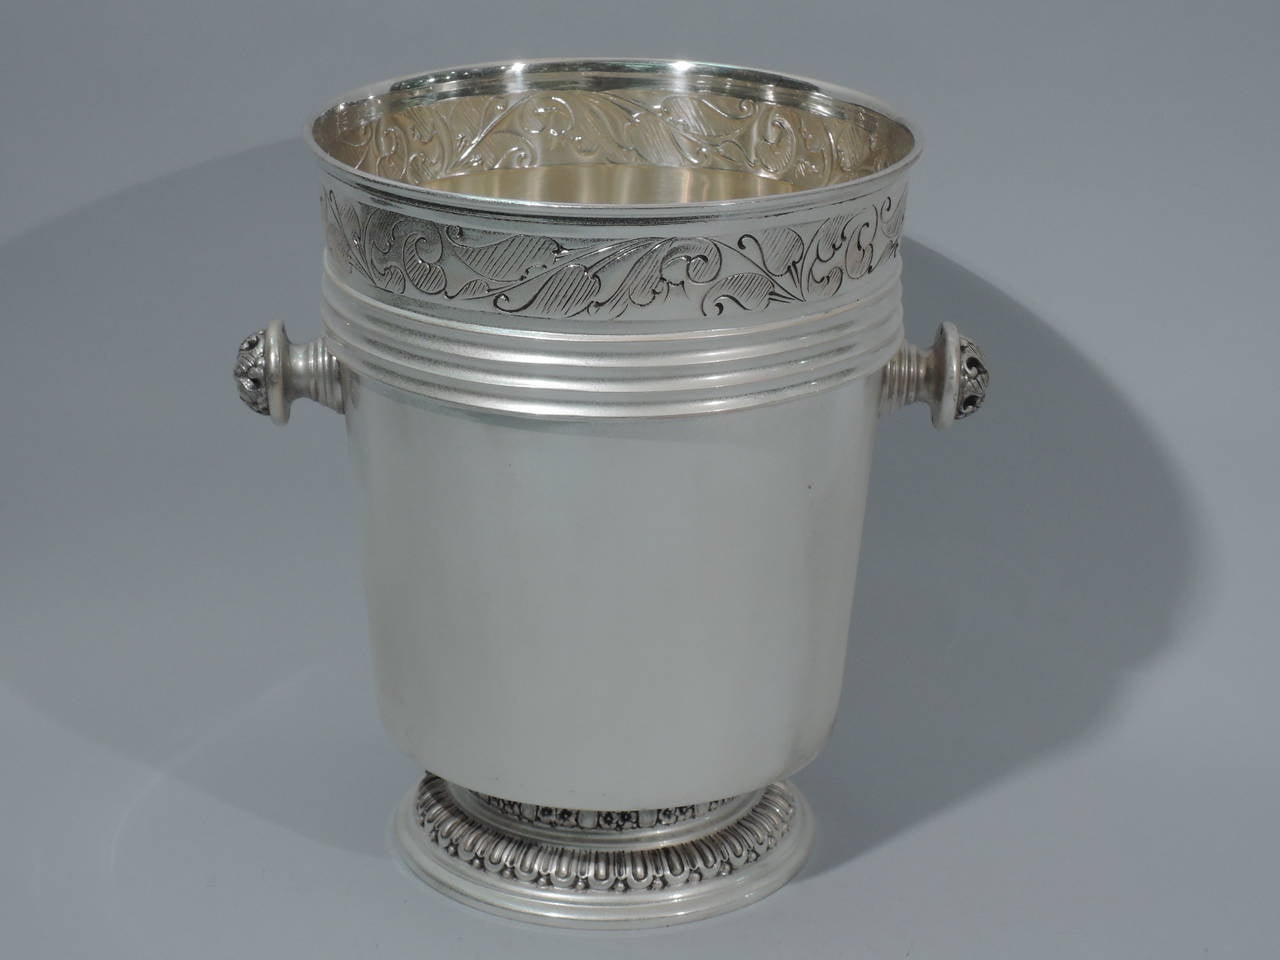 Modern classical wine cooler in 800 silver. Made by Mario Poli in Milan, ca. 1950. Straight and tapering sides. At top is engraved and stylized floral border above ribbed bands. Horizontal side handles in form of stepped cone mounted to dome with